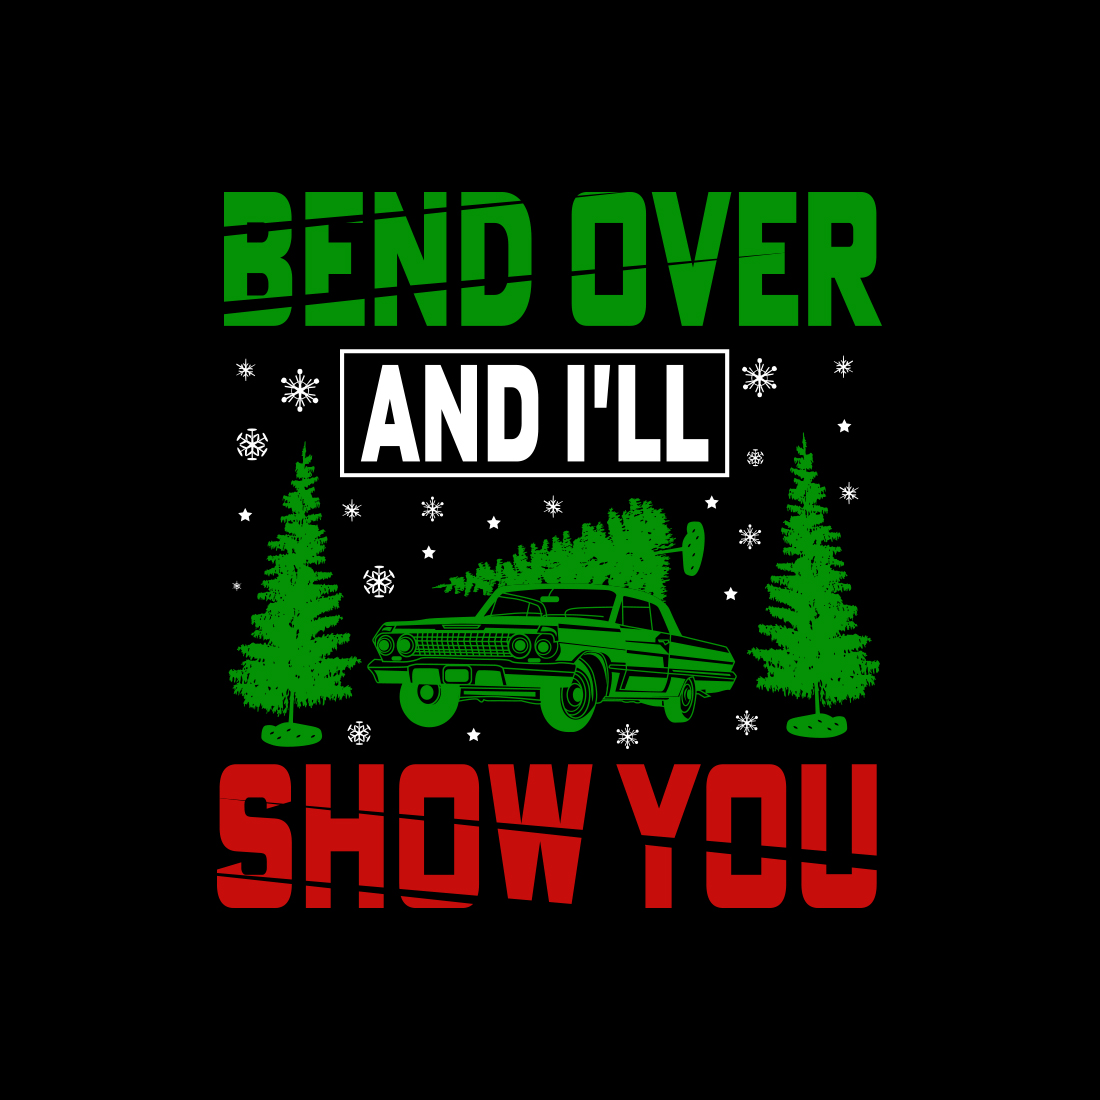 Bend over and i'll show you T-shirt design preview image.